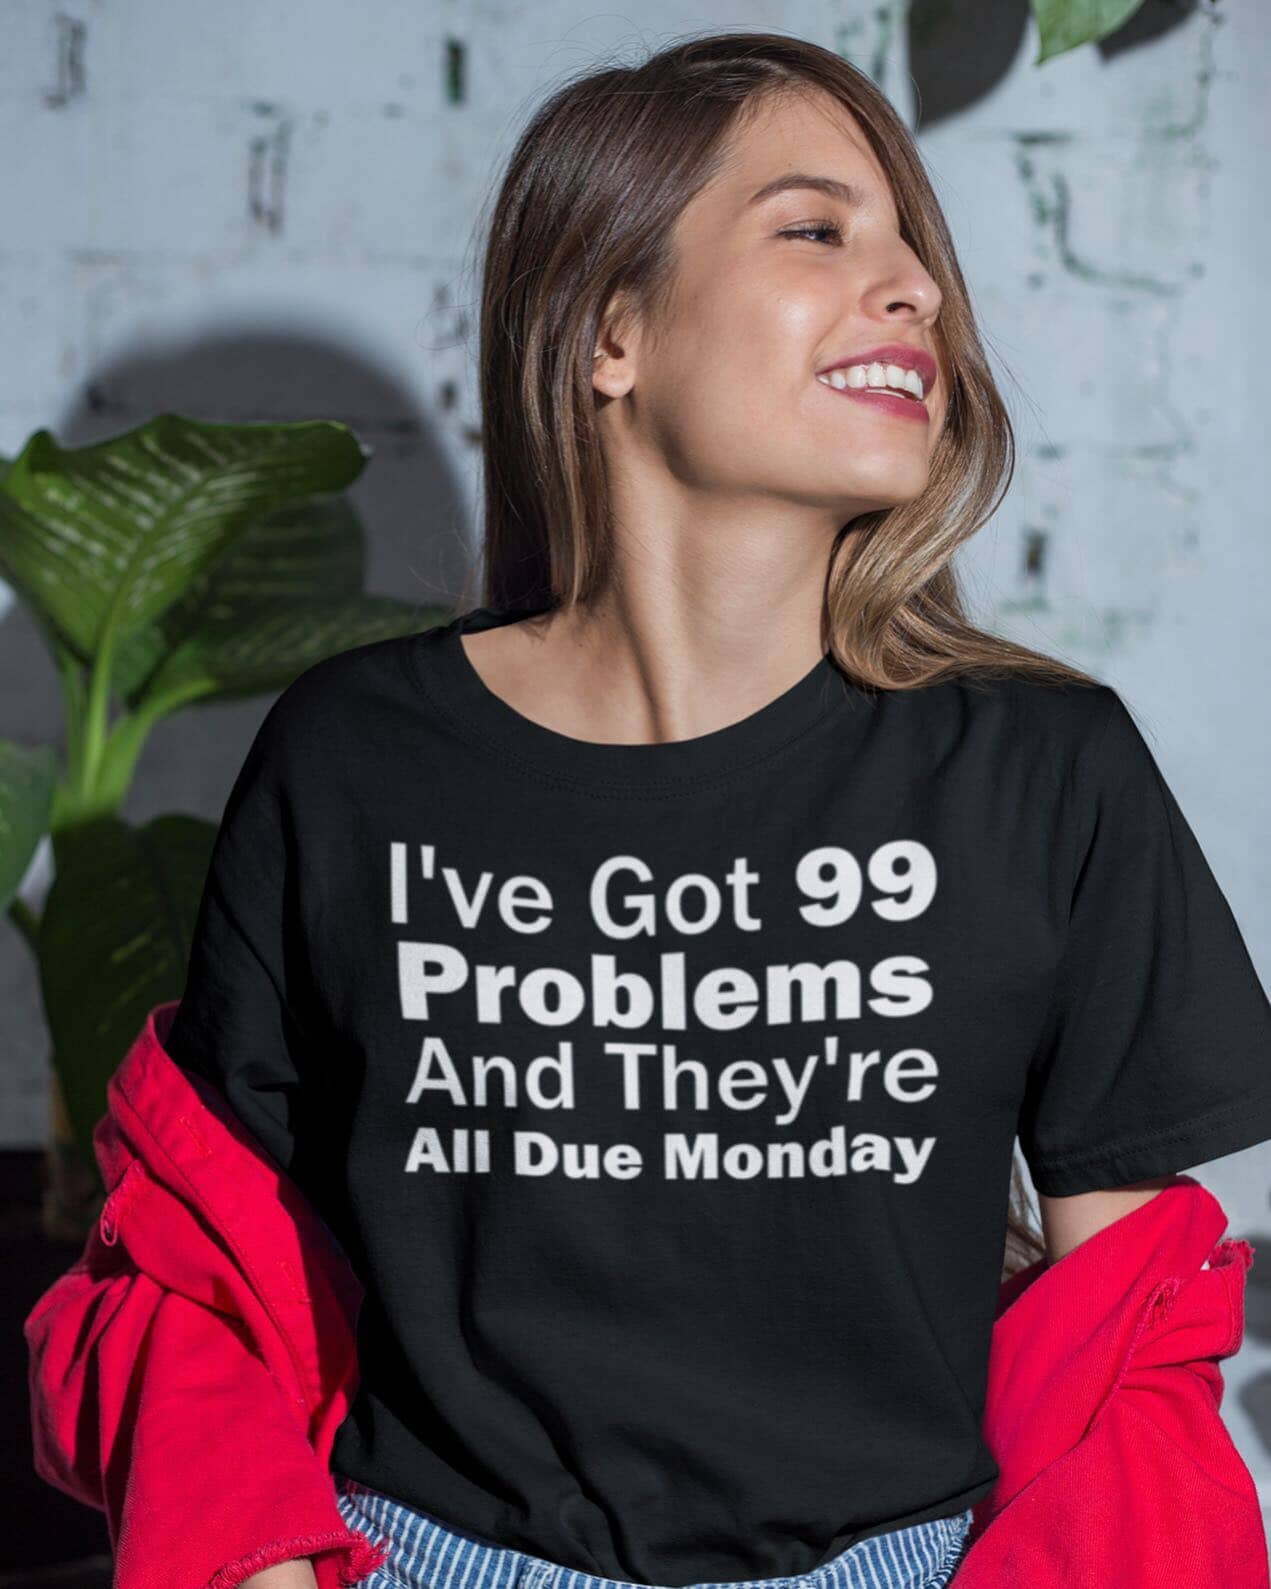 I got 99 problems and...